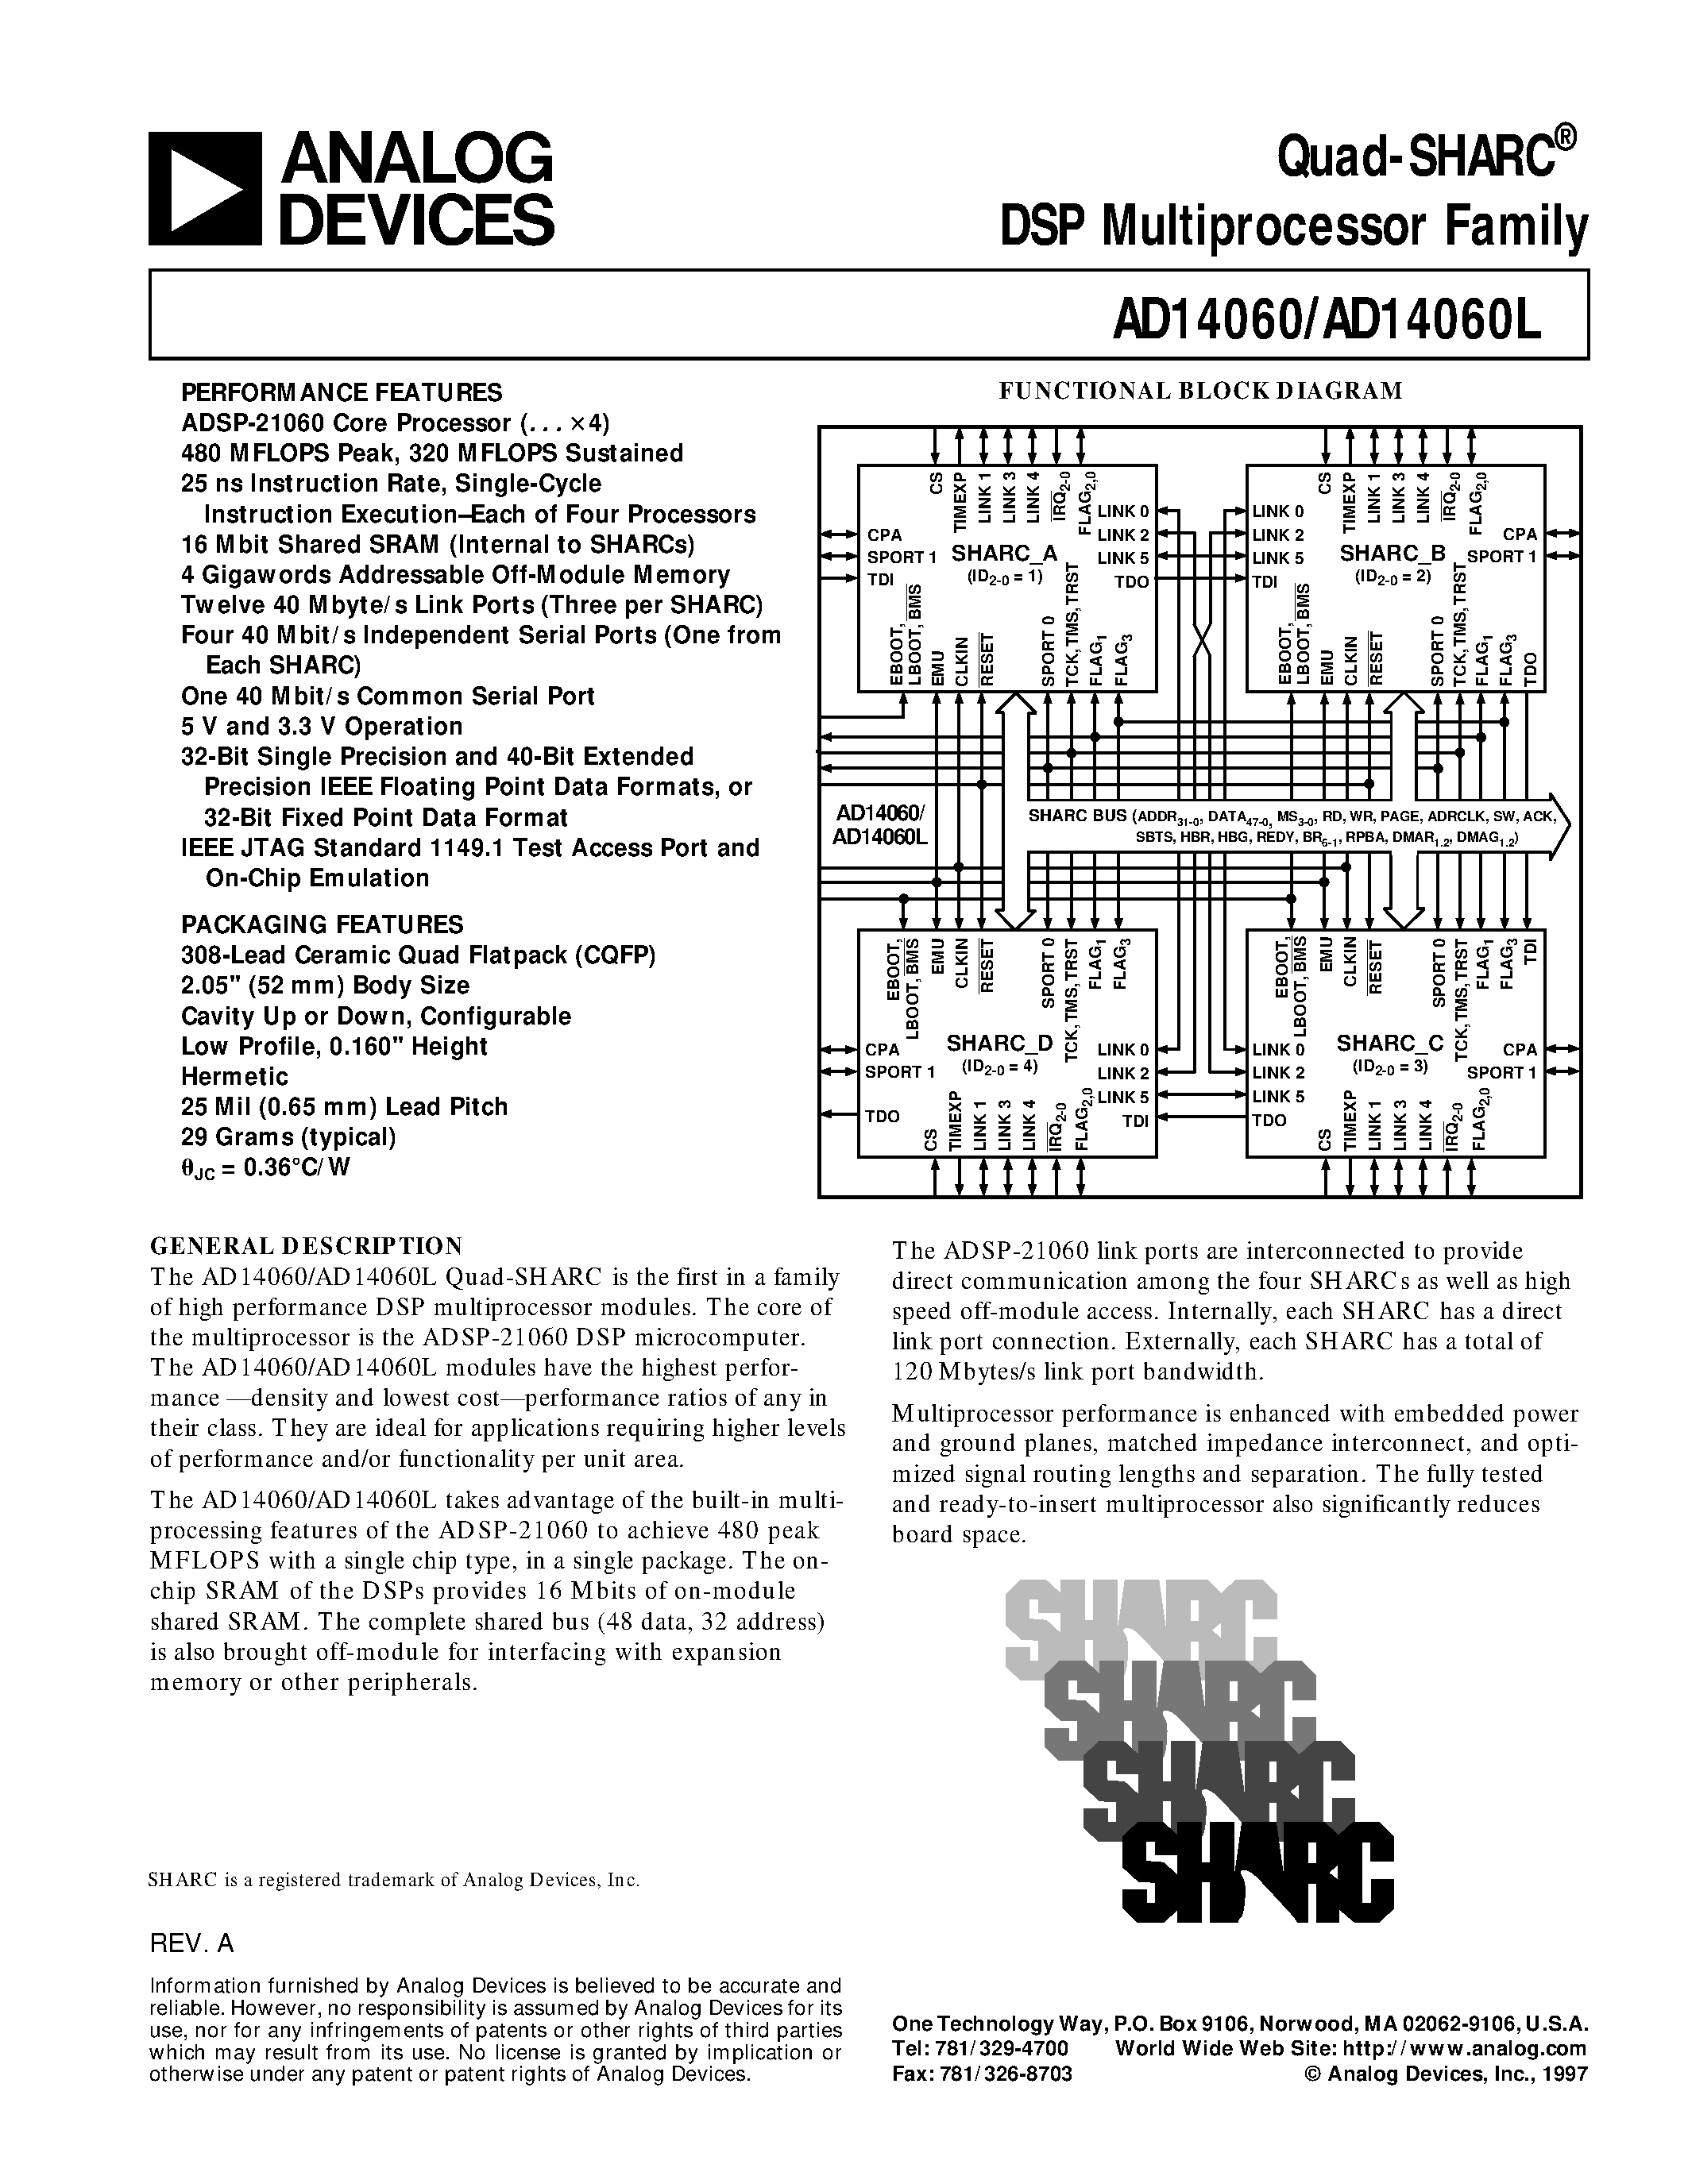 Datasheet AD14060 - Quad-SHARC DSP Multiprocessor Family page 1